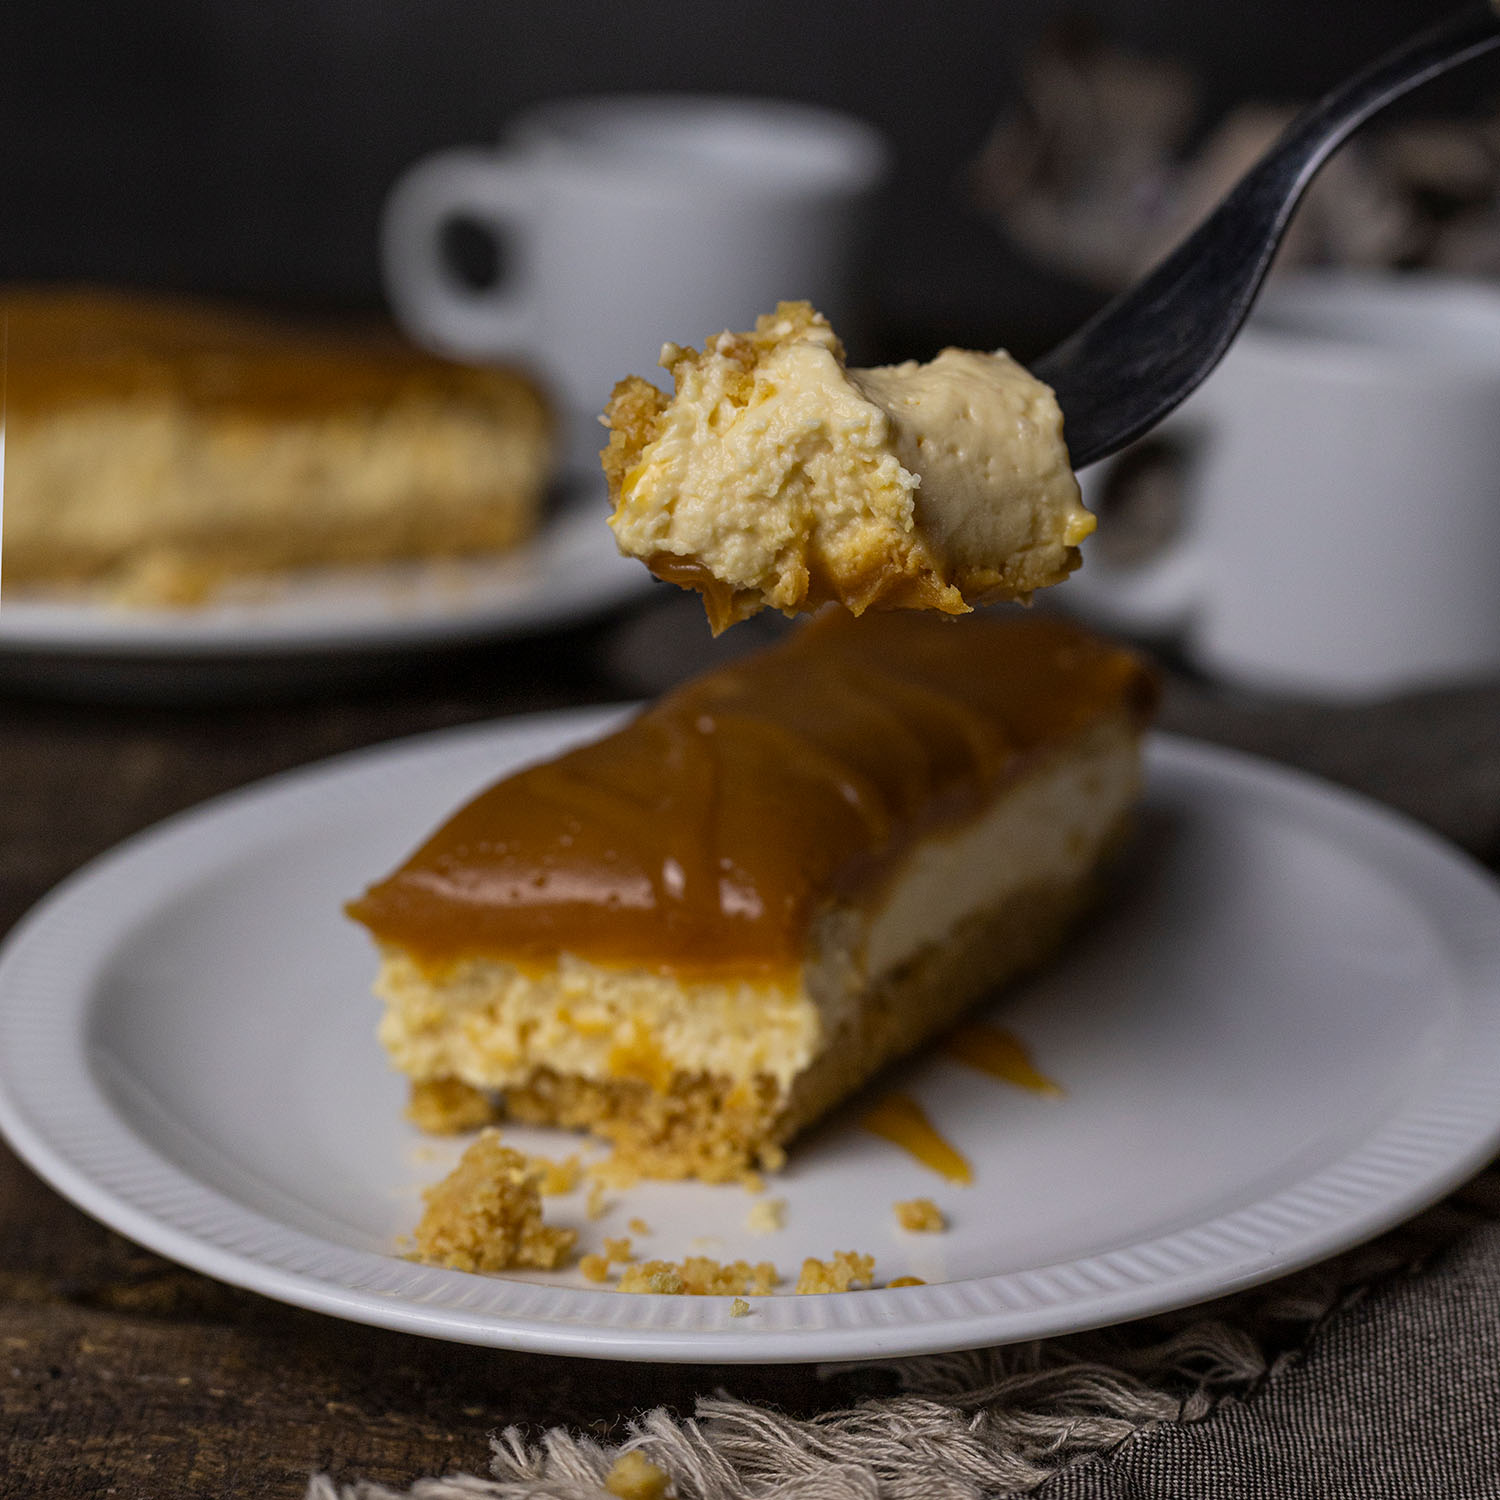 A taste of our Salted Caramel Cheesecake